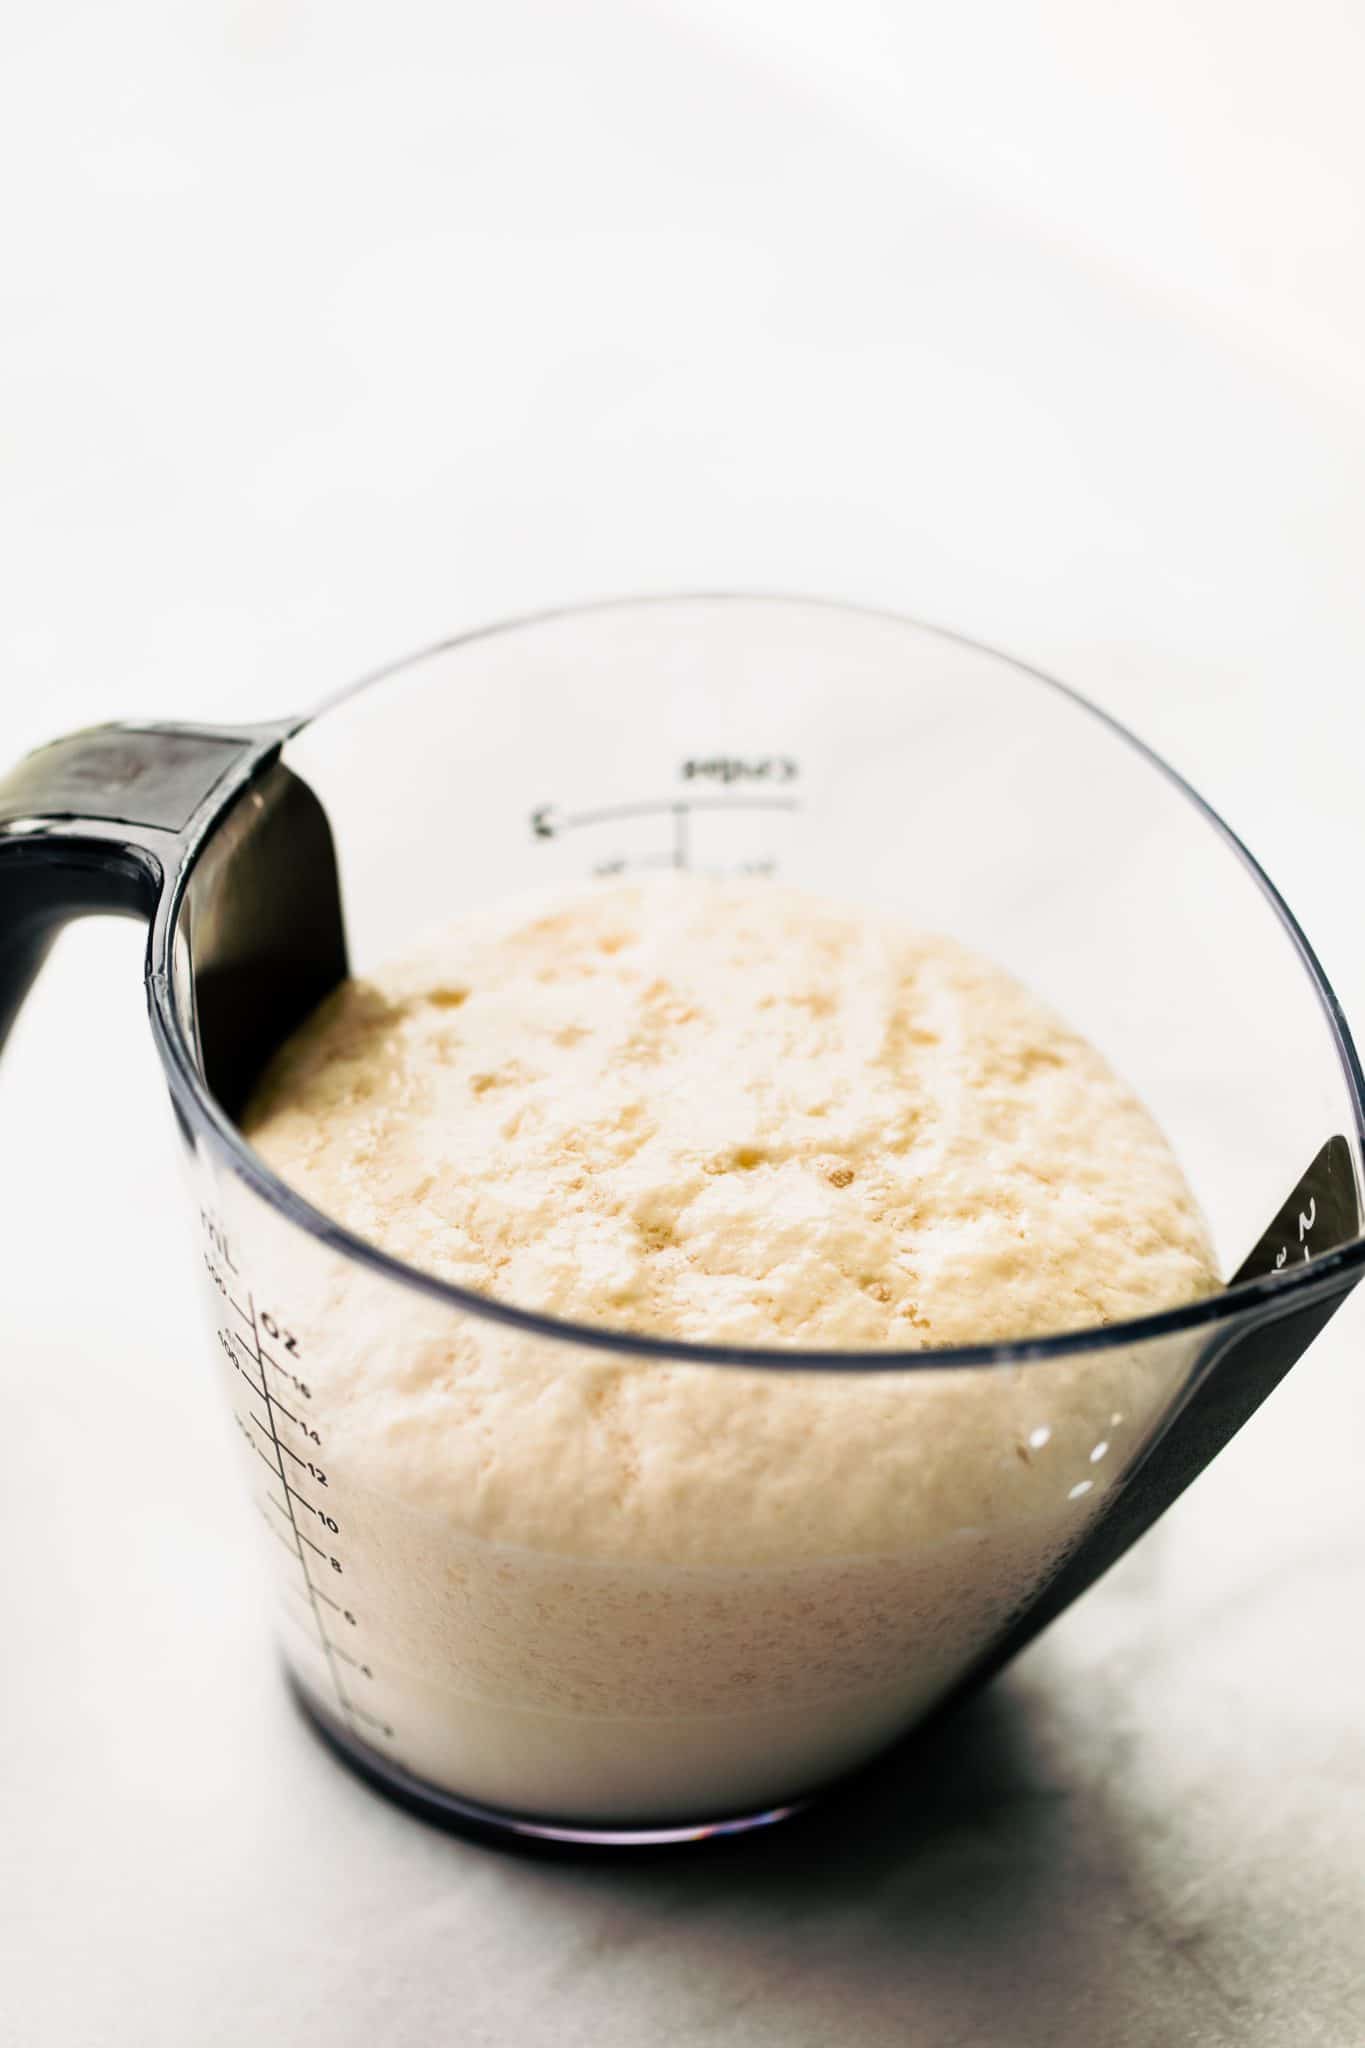 bubbly activated yeast in a measuring cup